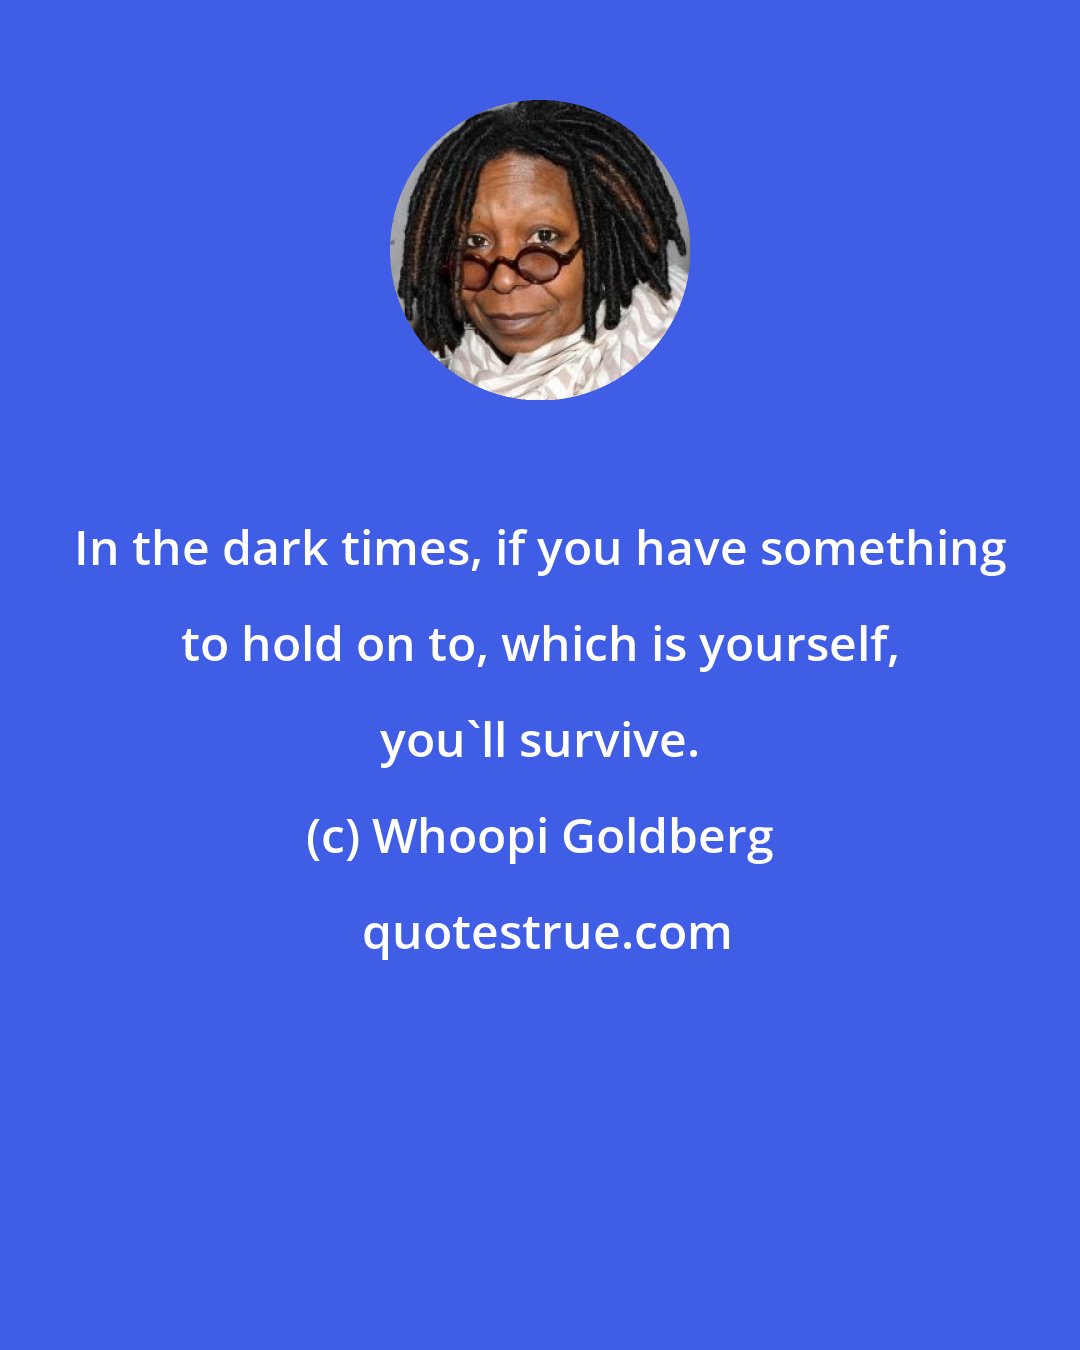 Whoopi Goldberg: In the dark times, if you have something to hold on to, which is yourself, you'll survive.